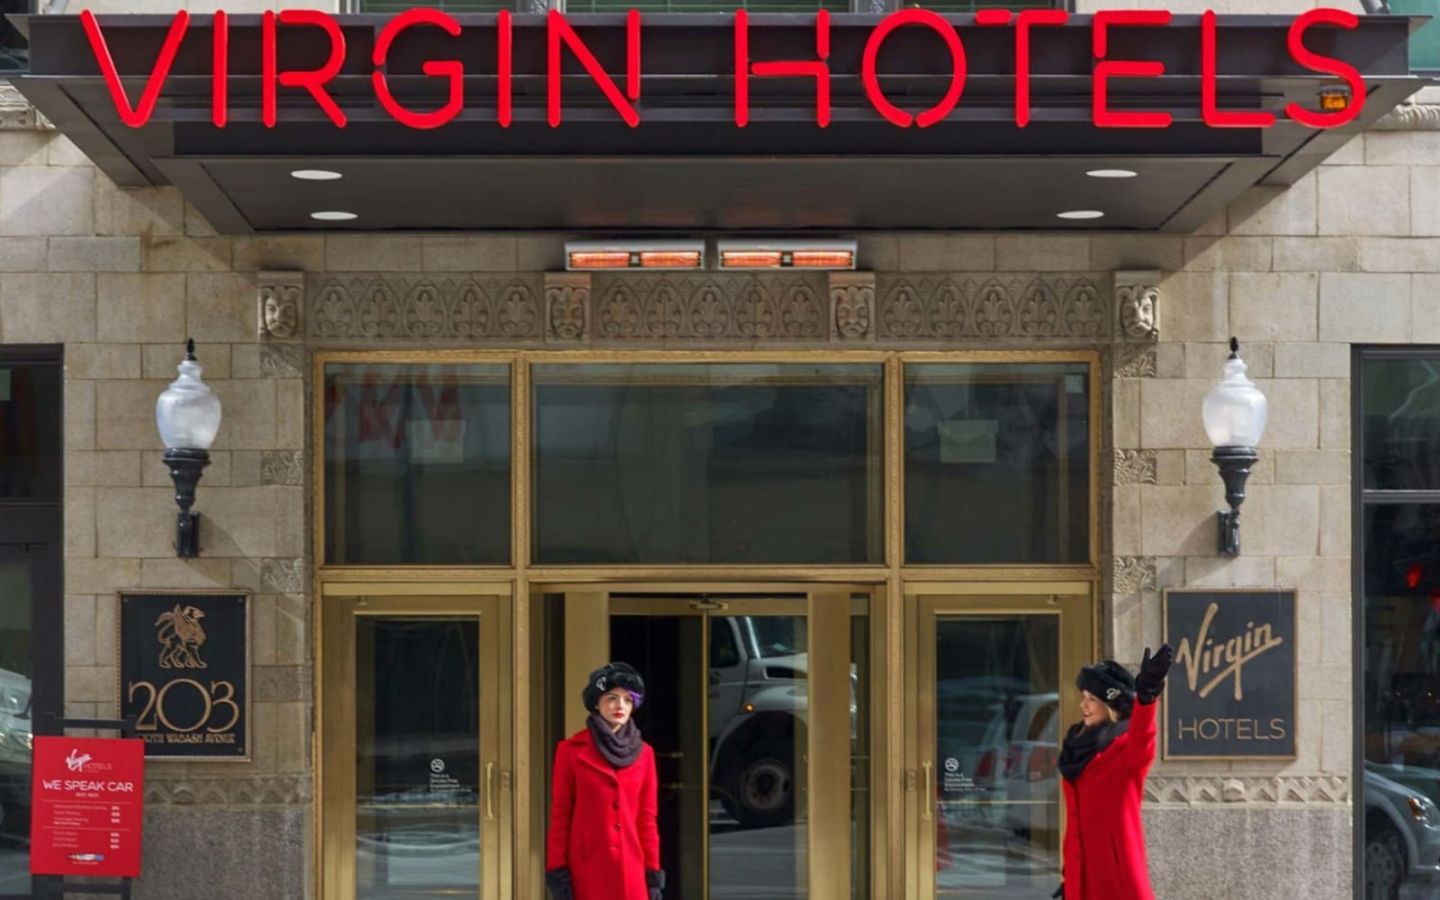 The exterior entrance to Virgin Hotels Chicago. Two women in red coats are standing outside, one is hailing a taxi